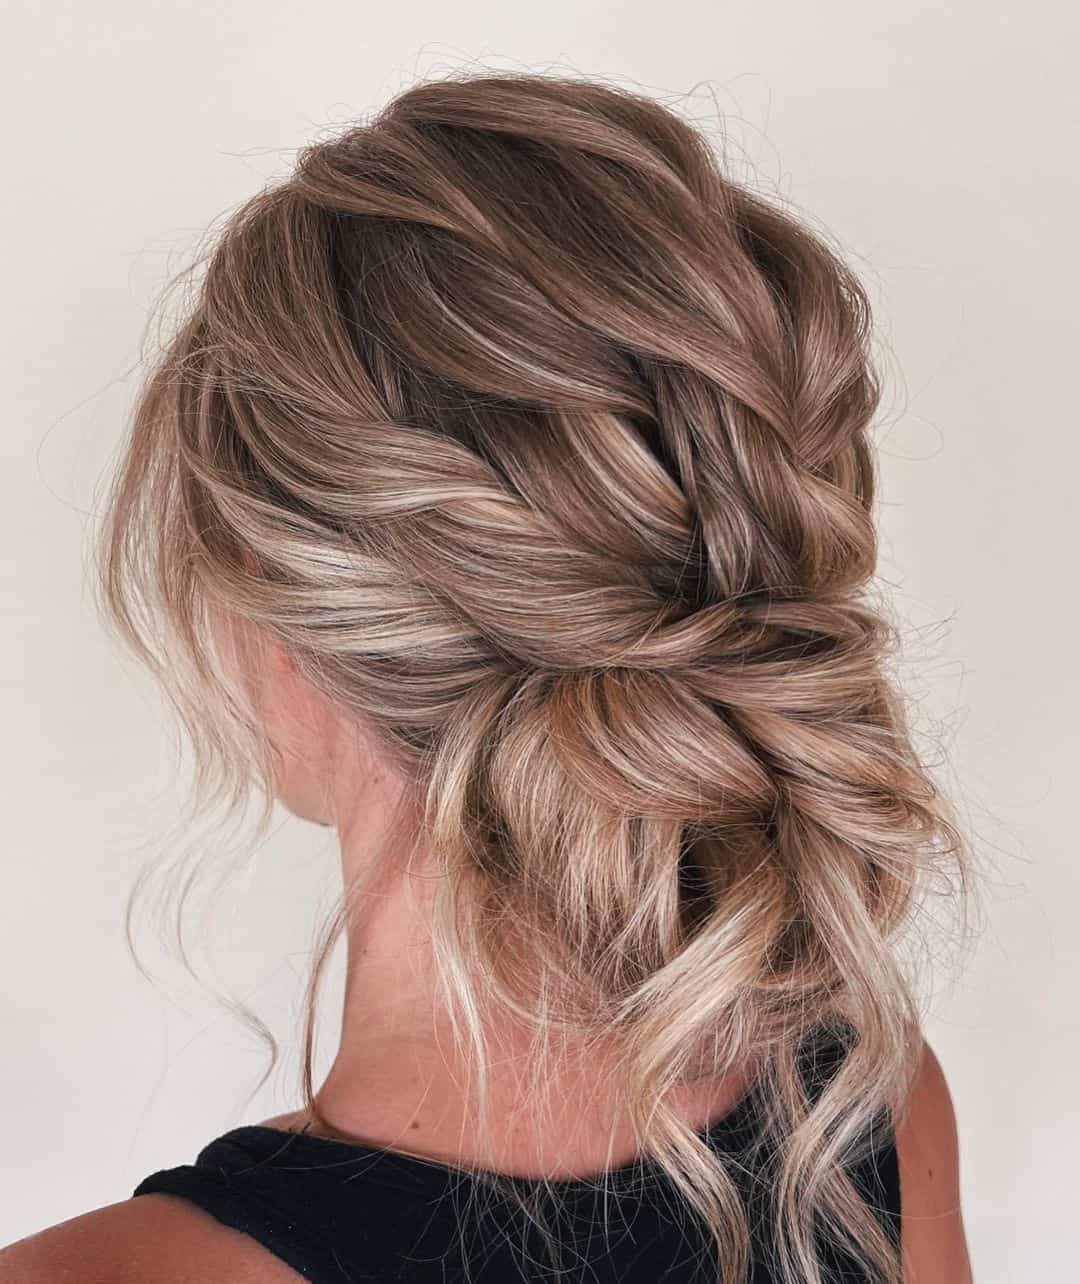 updos hairstyle